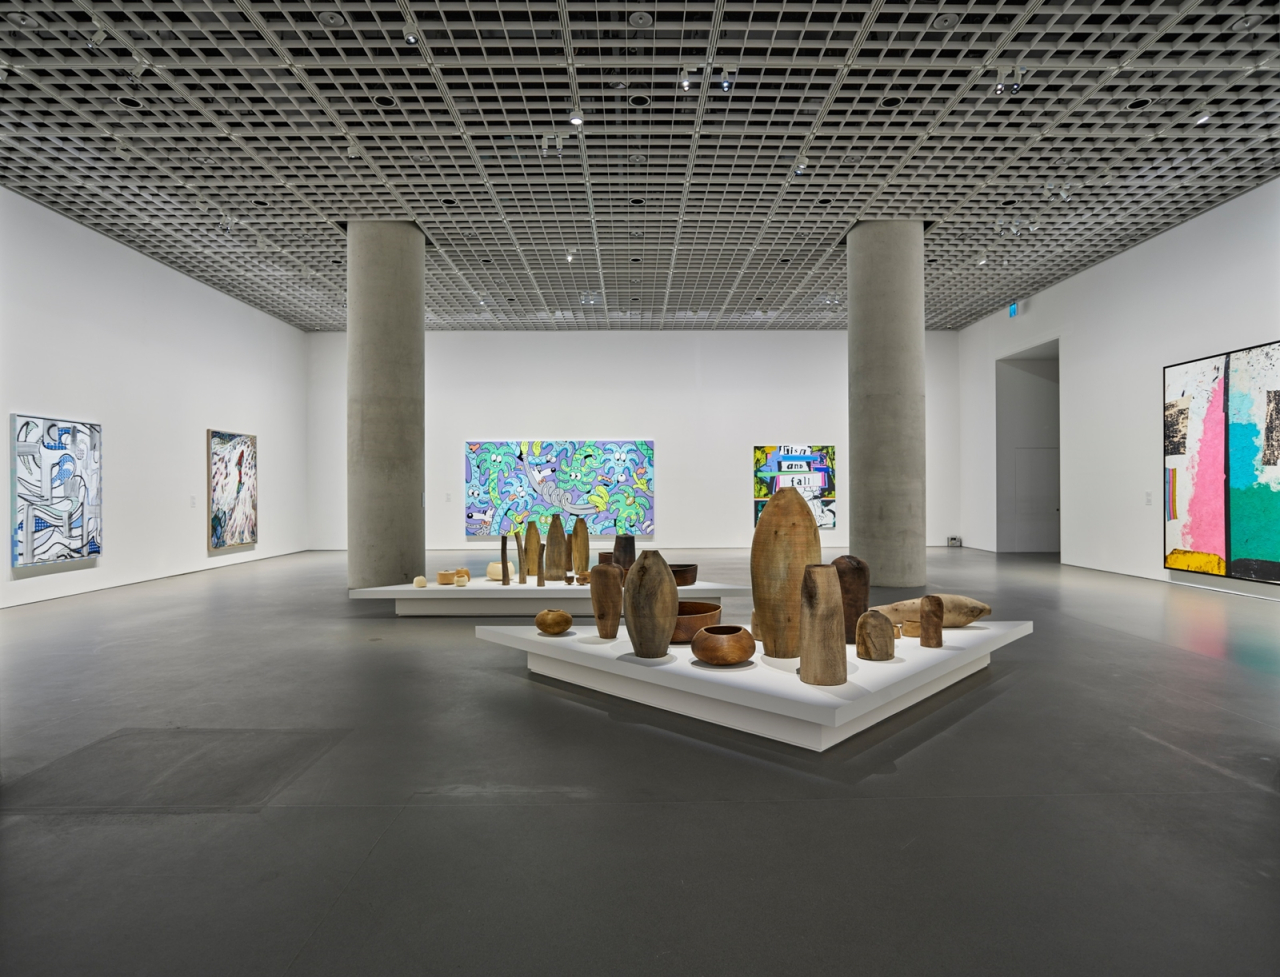 Installation view of the exhibition “APMA, Chapter Three” at Amorepacific Museum of Art (APMA)